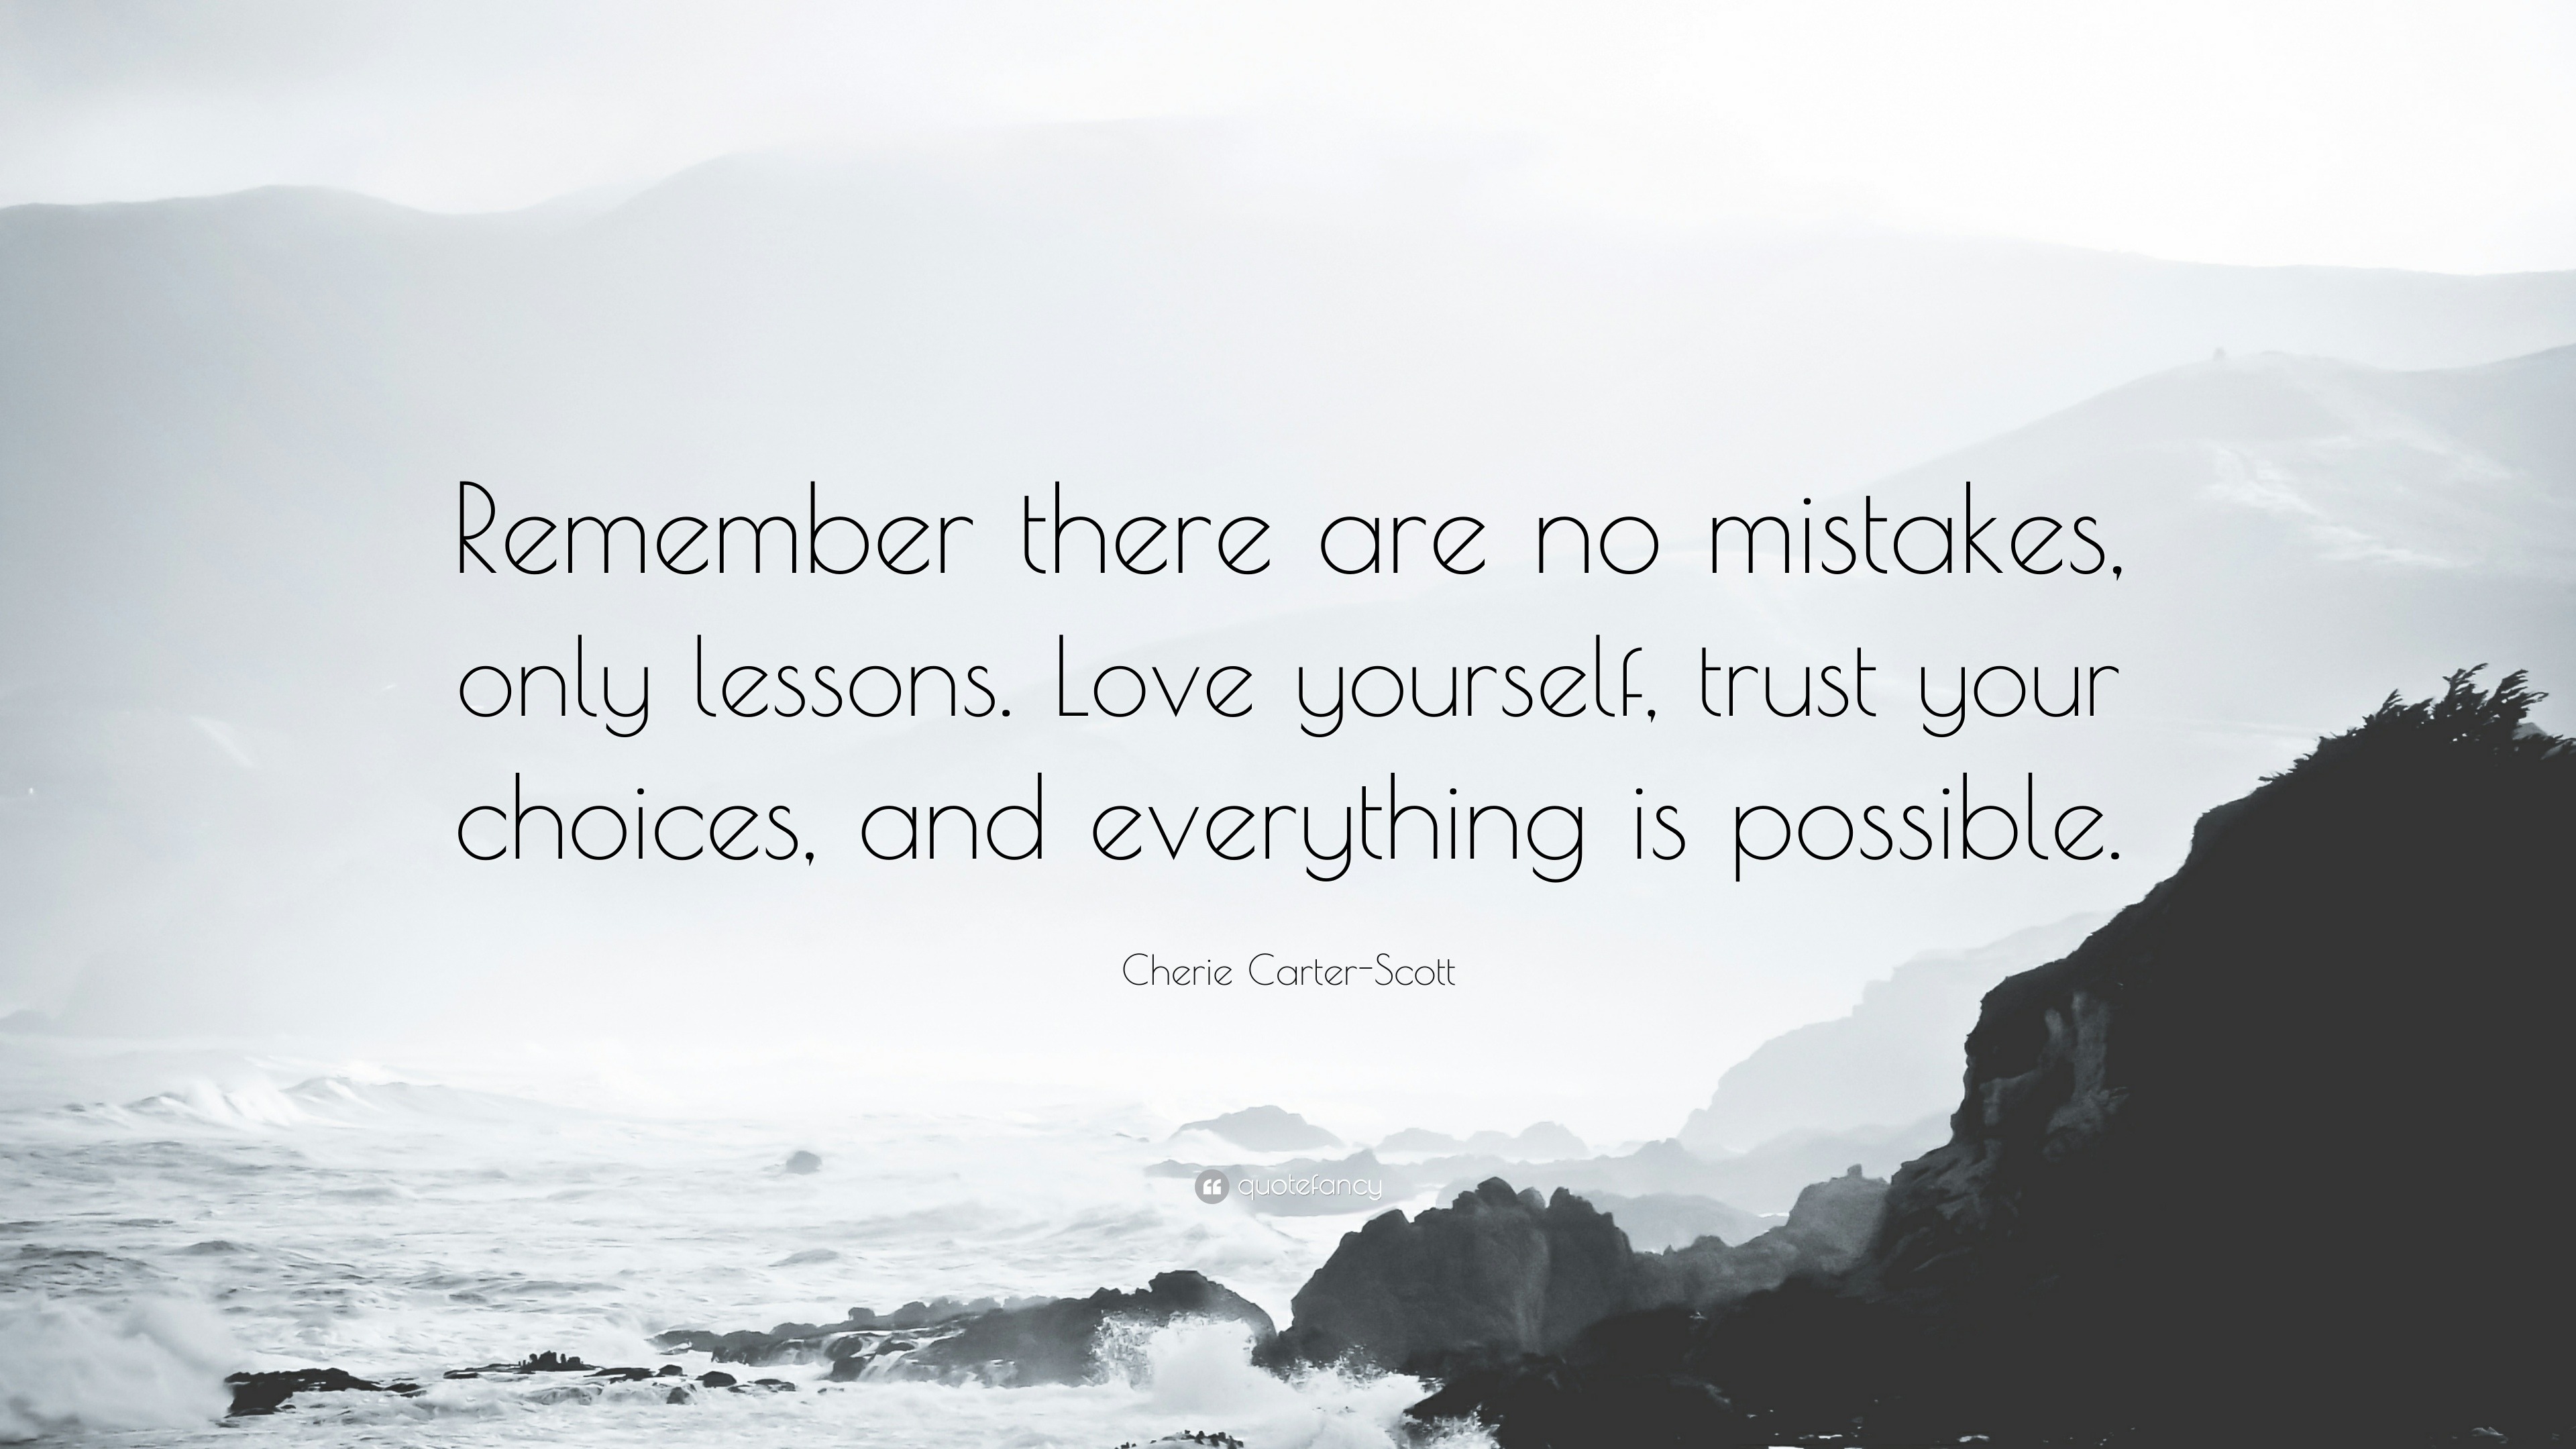 love mistakes quotes